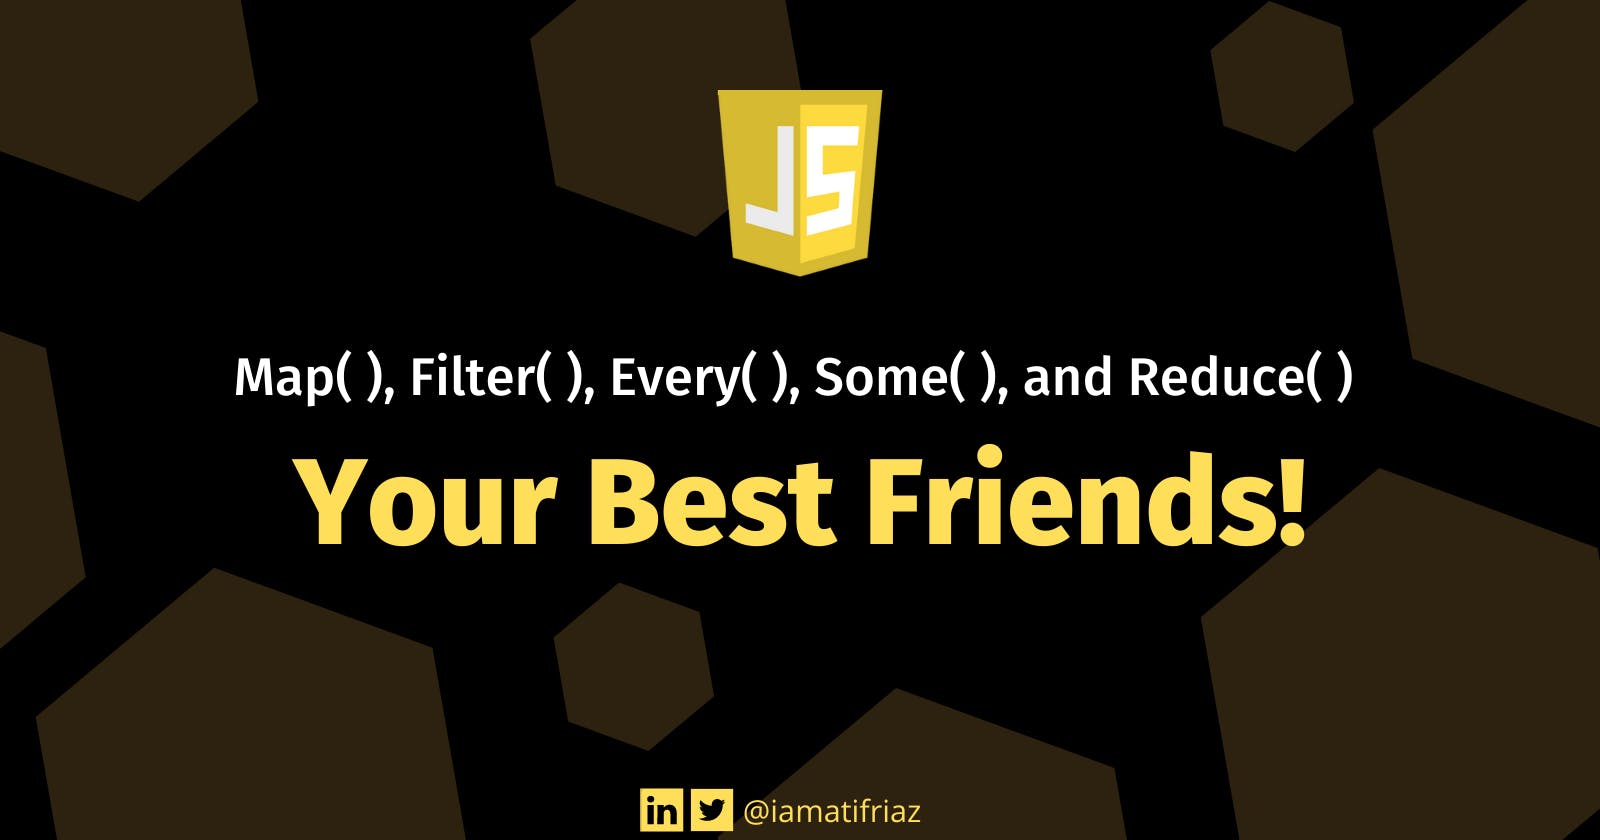 Map(), Filter(), Every(), Some(), Reduce() are your best friends!